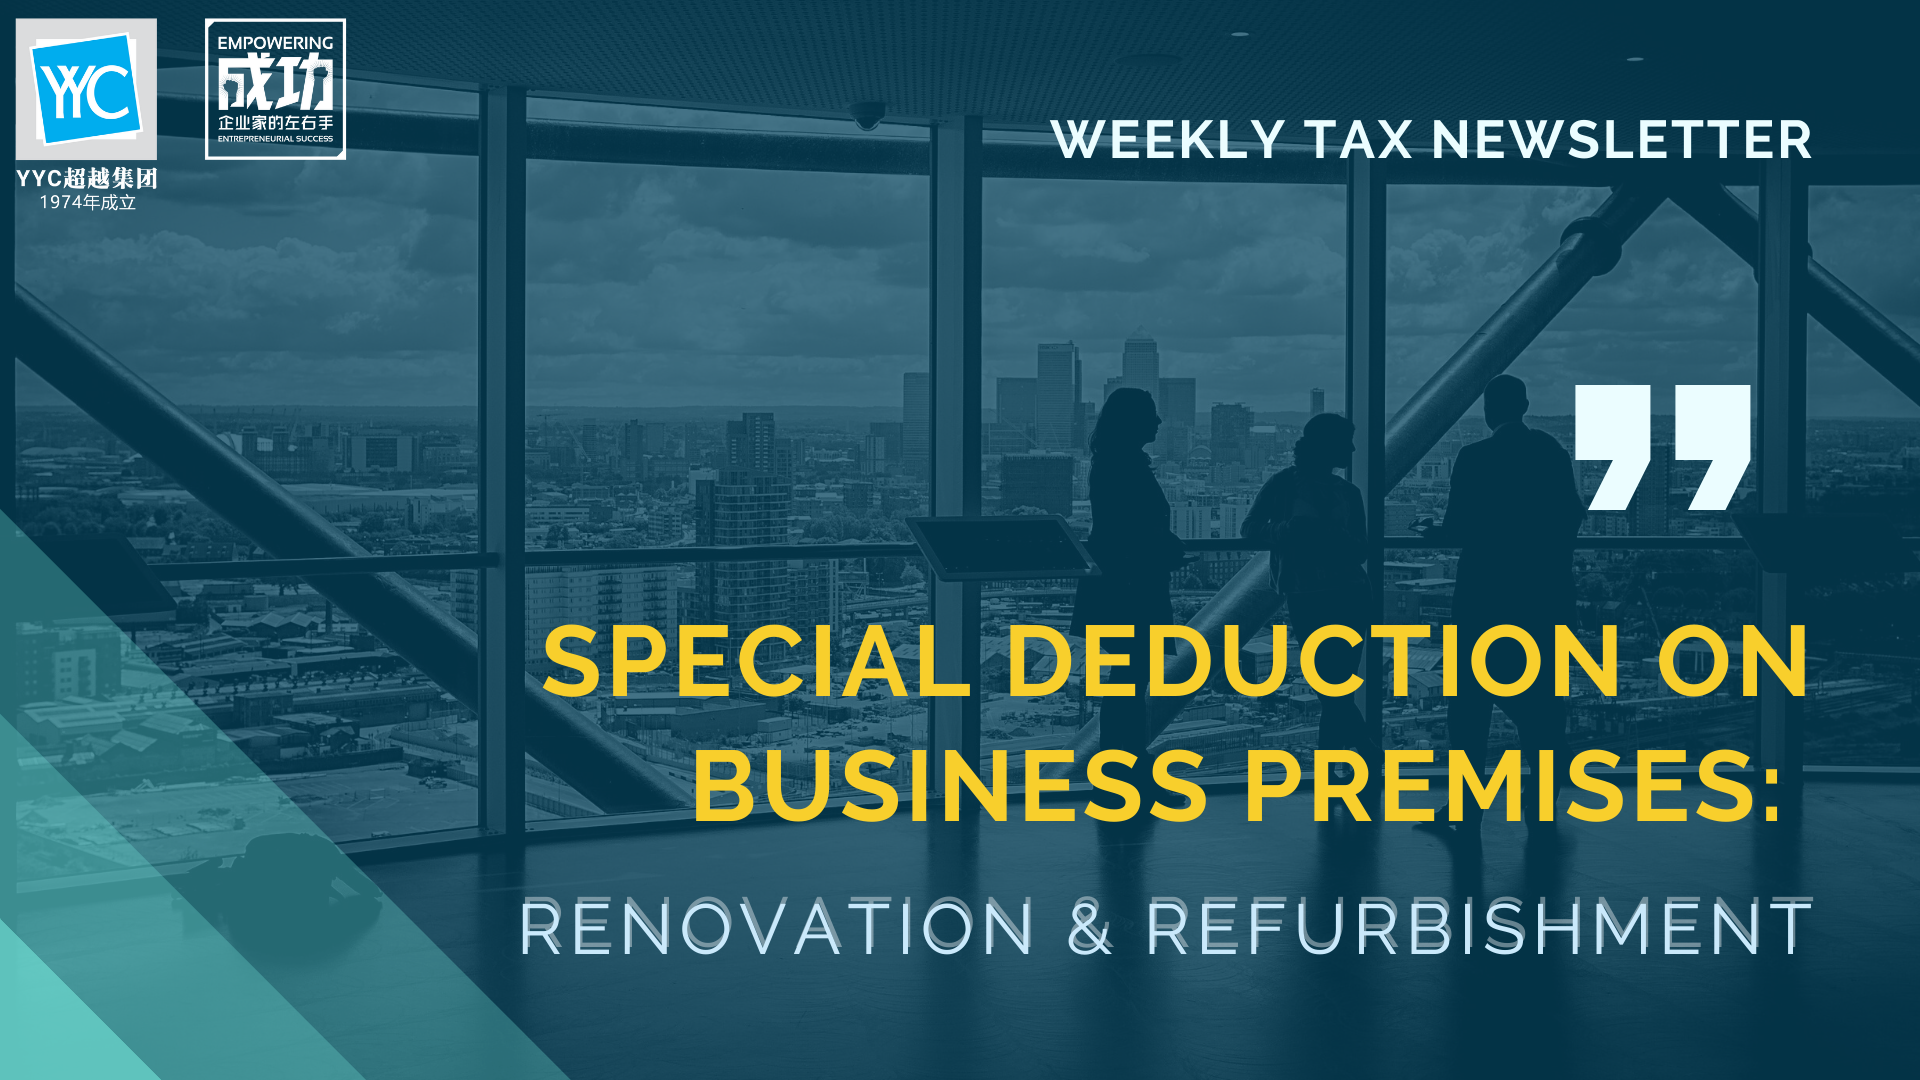 The Government of Malaysia has initially introduced special tax deduction on cost of renovation incurred from 1 March 2020 to 31 December 2020 in the first.....